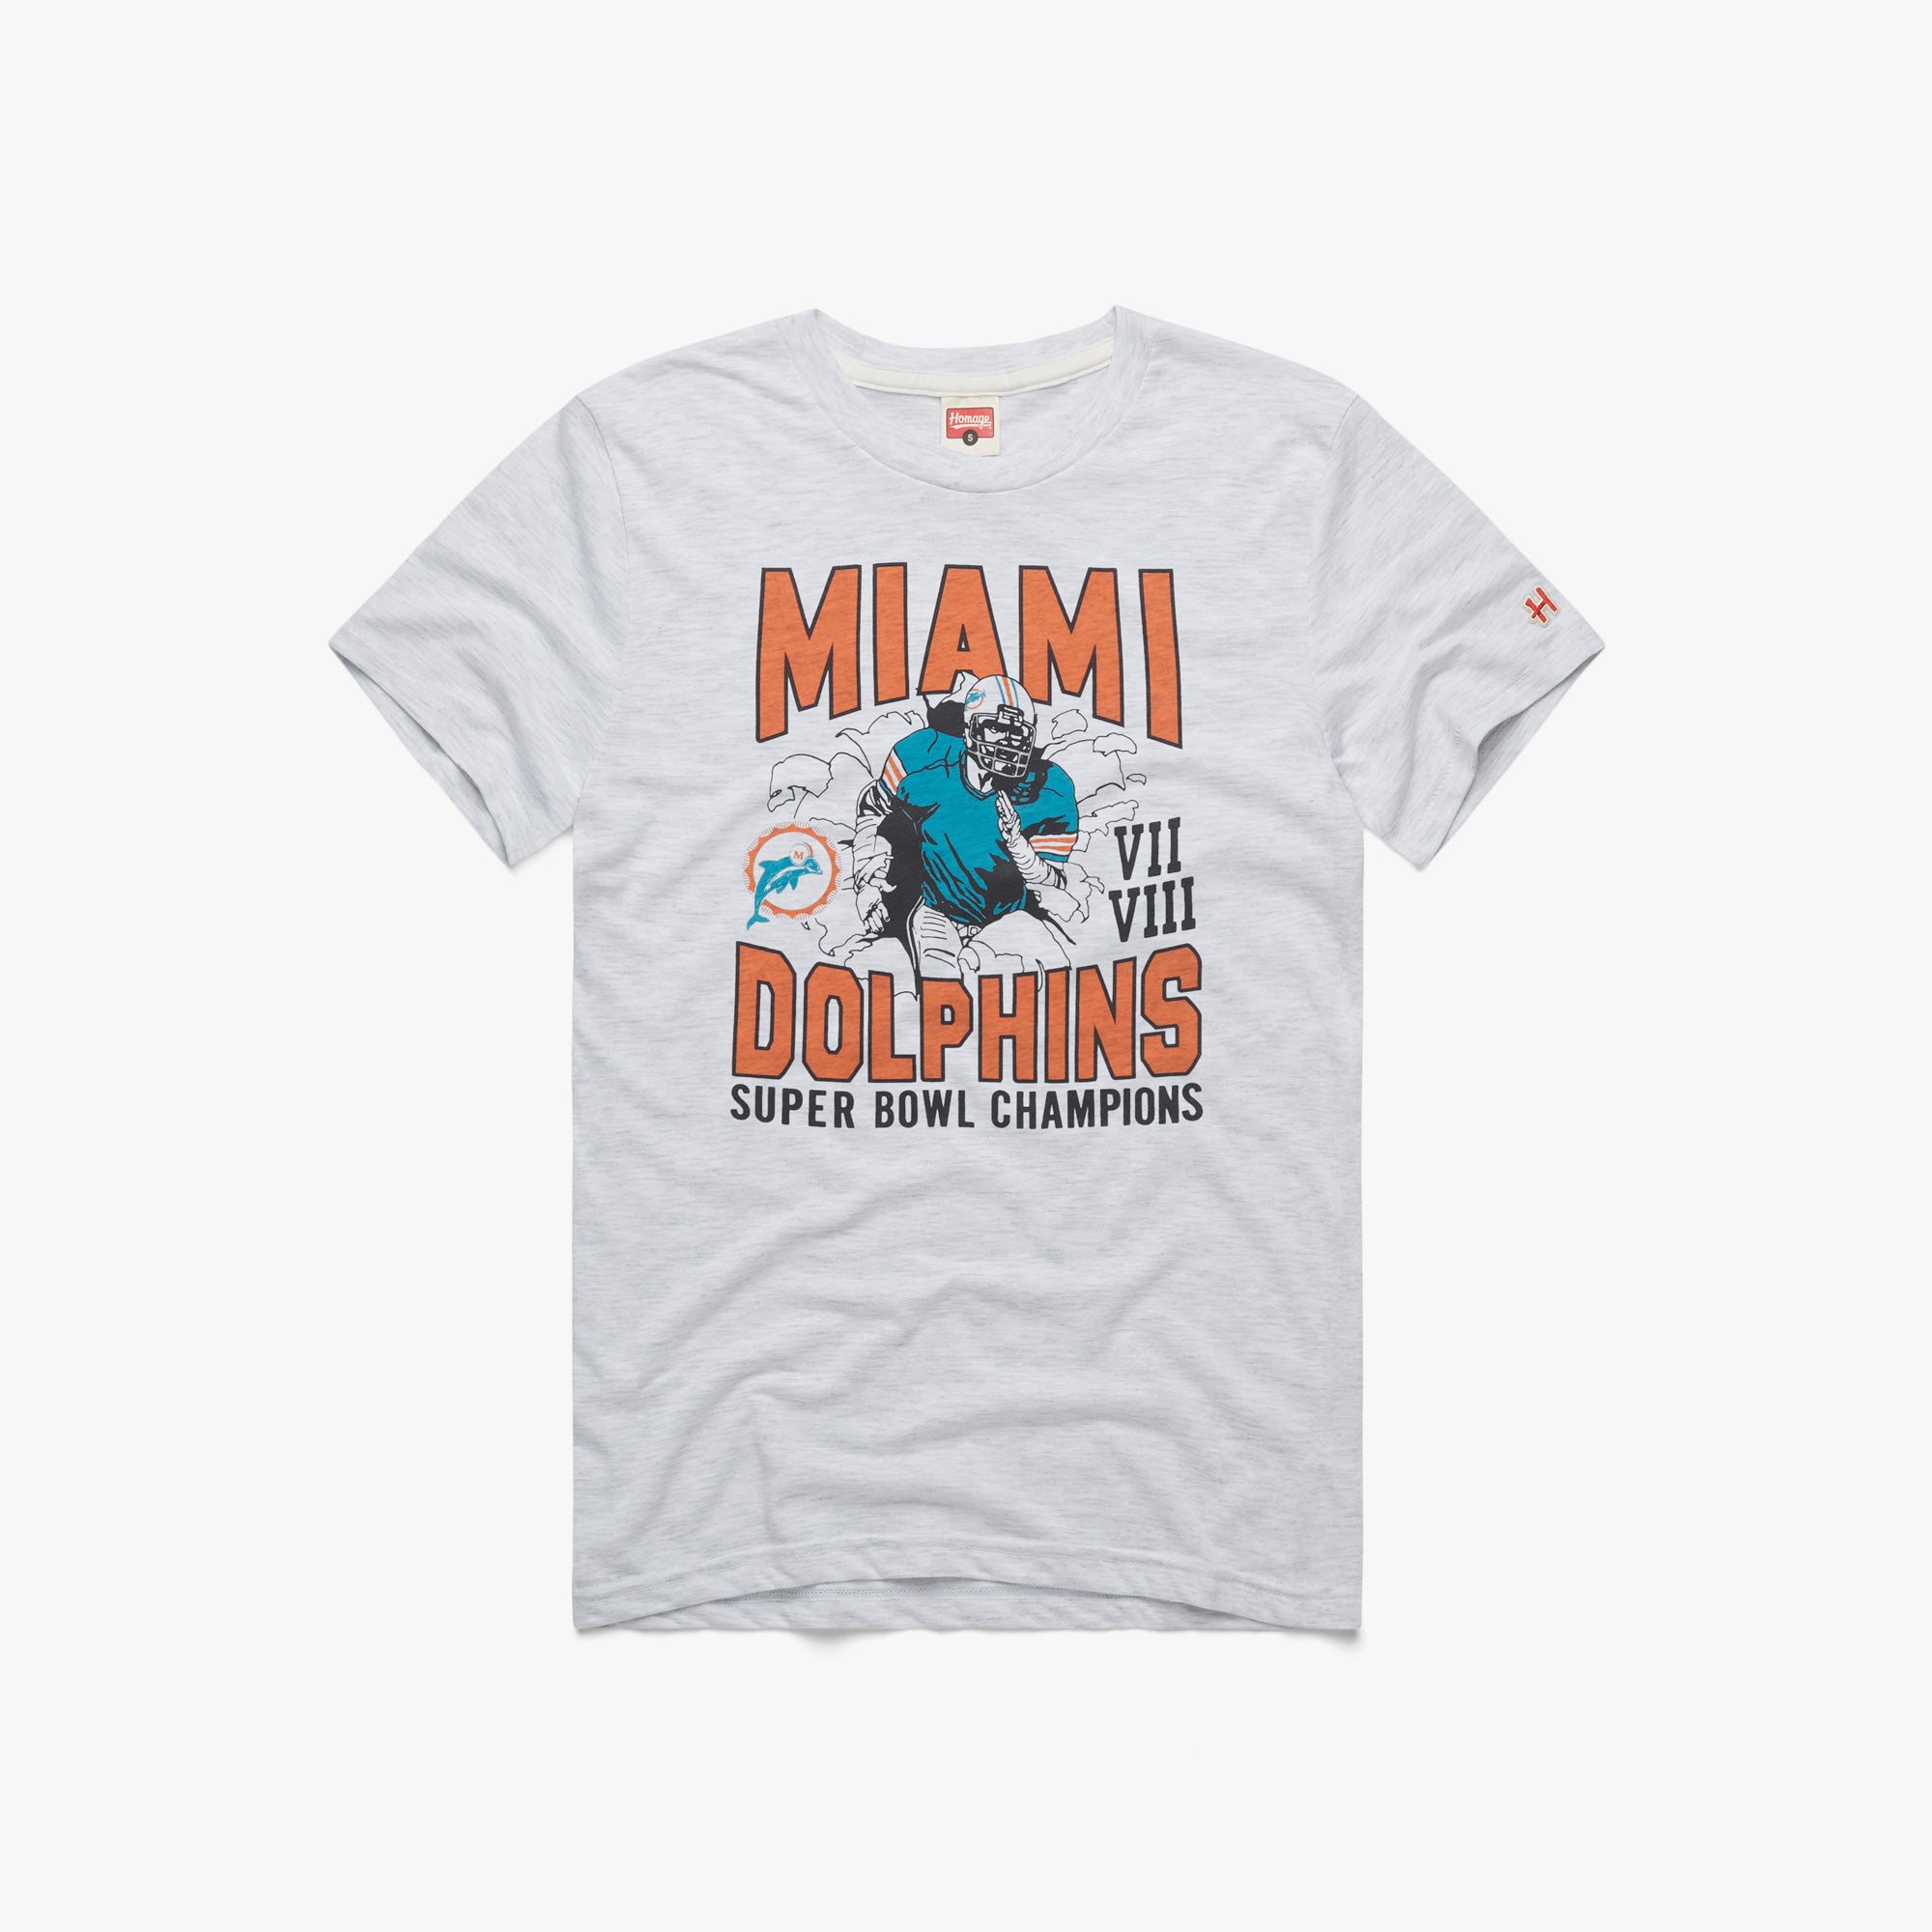 Miami Dolphins 2 Time Super Bowl Champions T-Shirt from Homage. | Officially Licensed Vintage NFL Apparel from Homage Pro Shop.